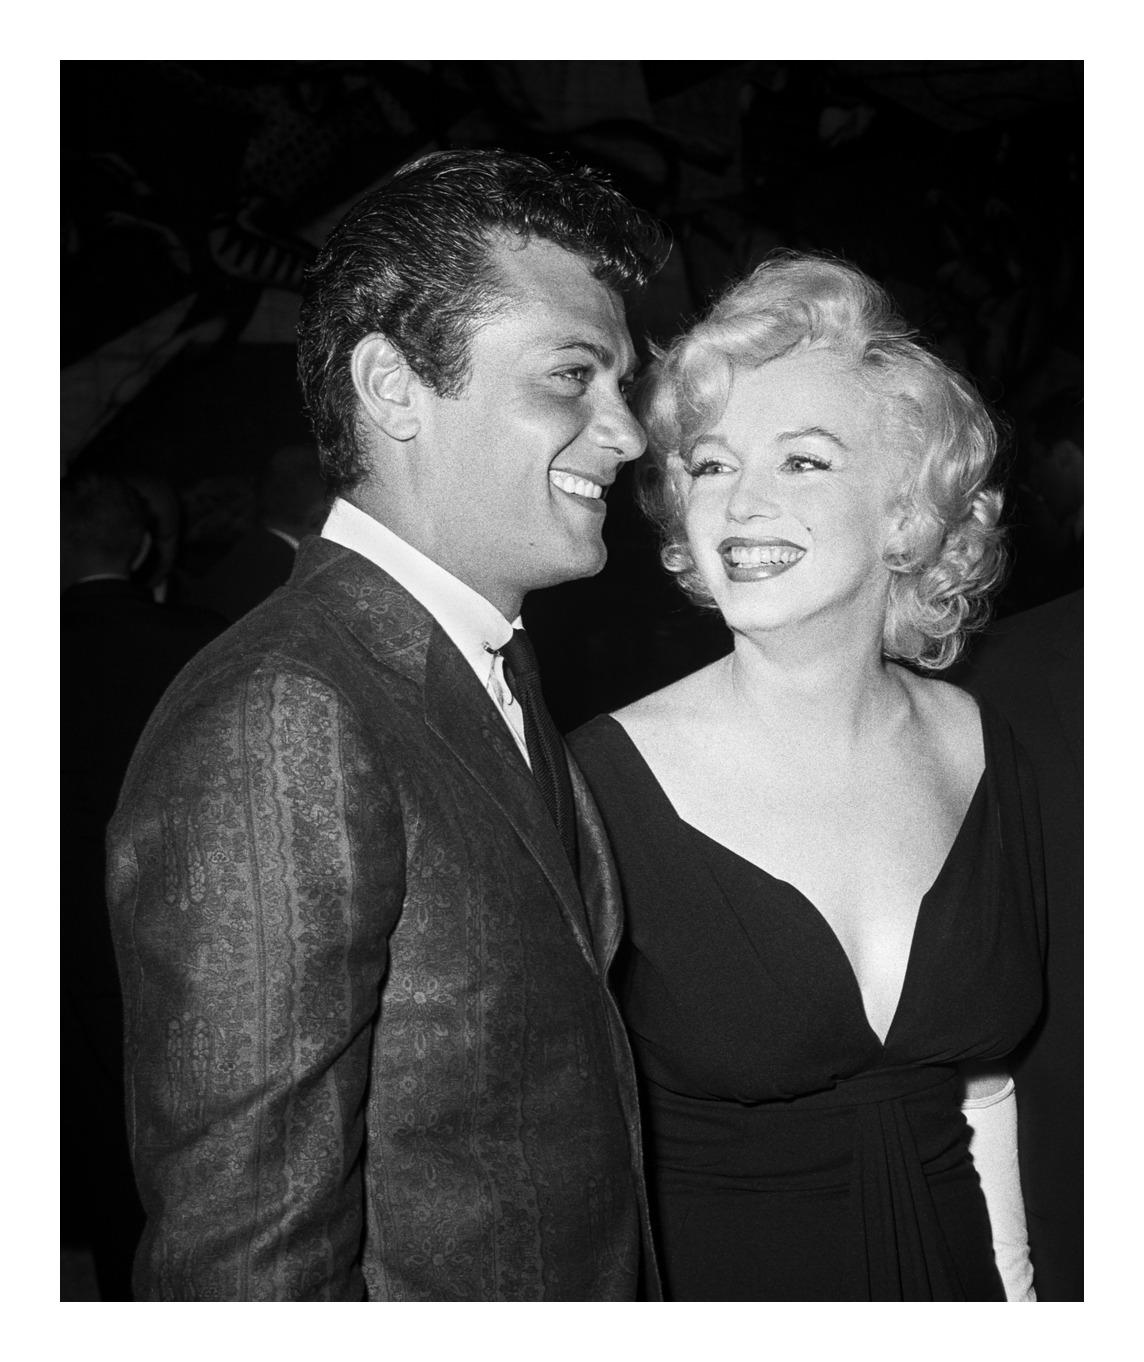 Tony Curtis and Marilyn Monroe 16